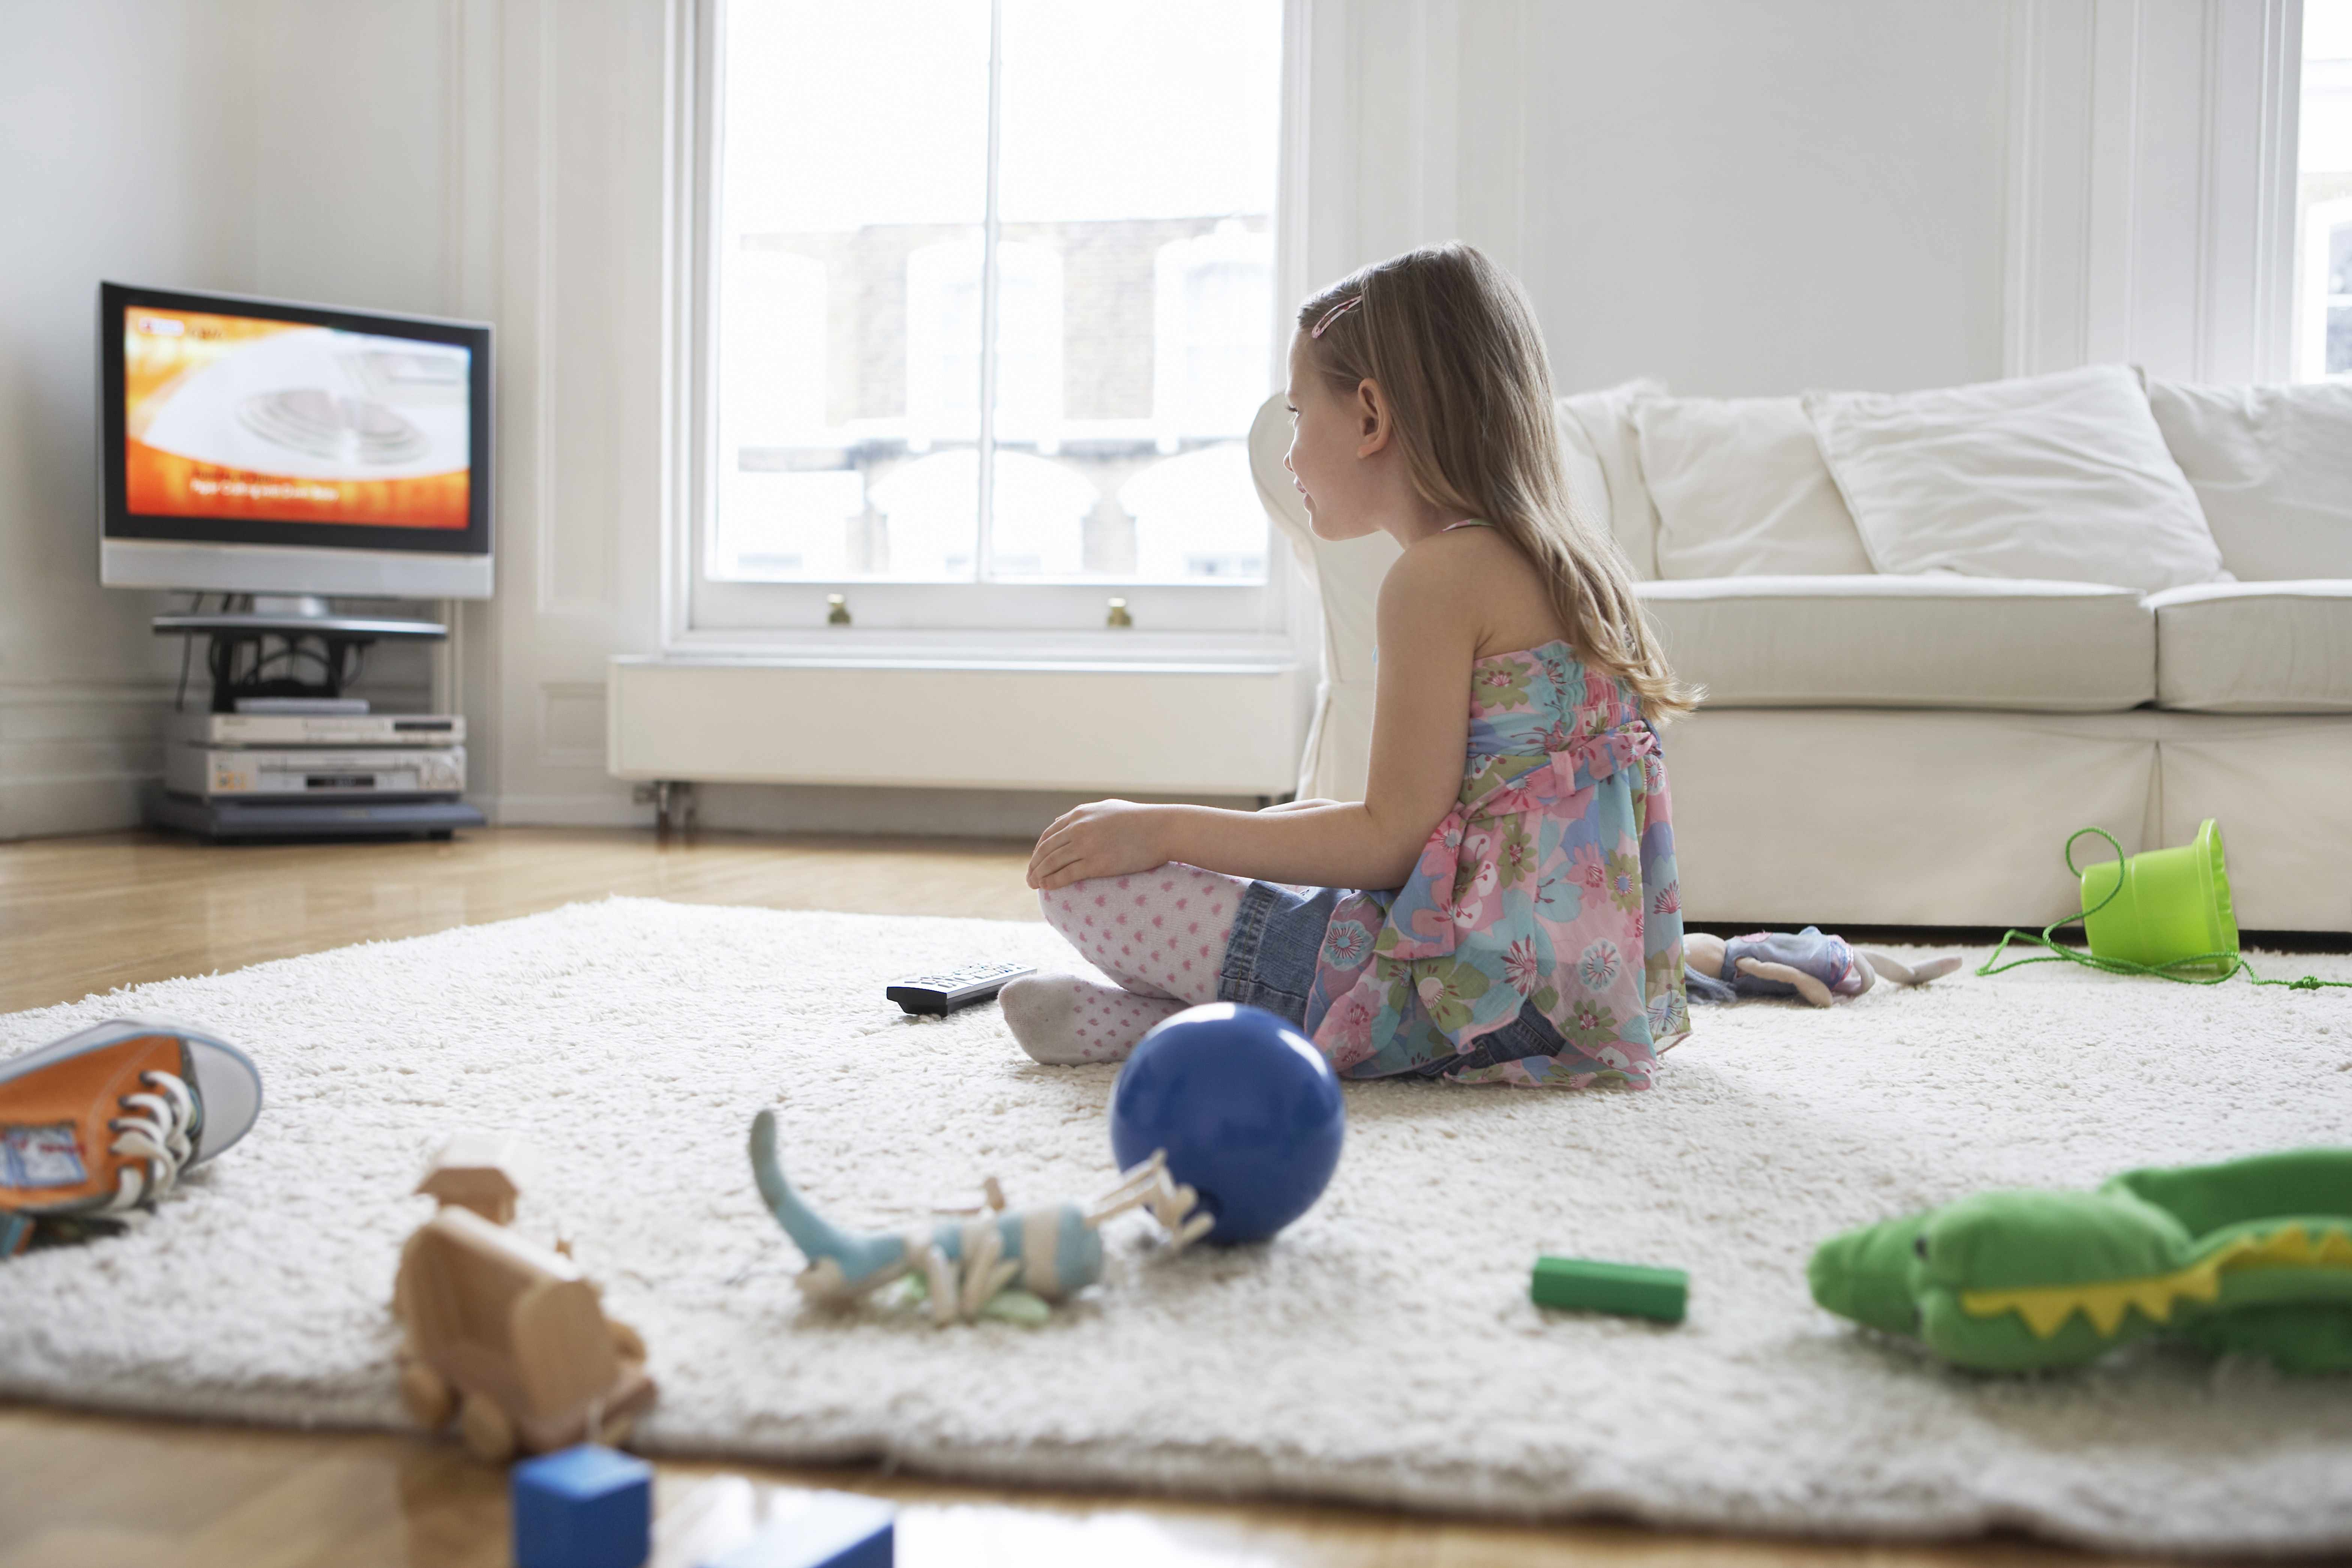 little girl staring at television screen, monitor